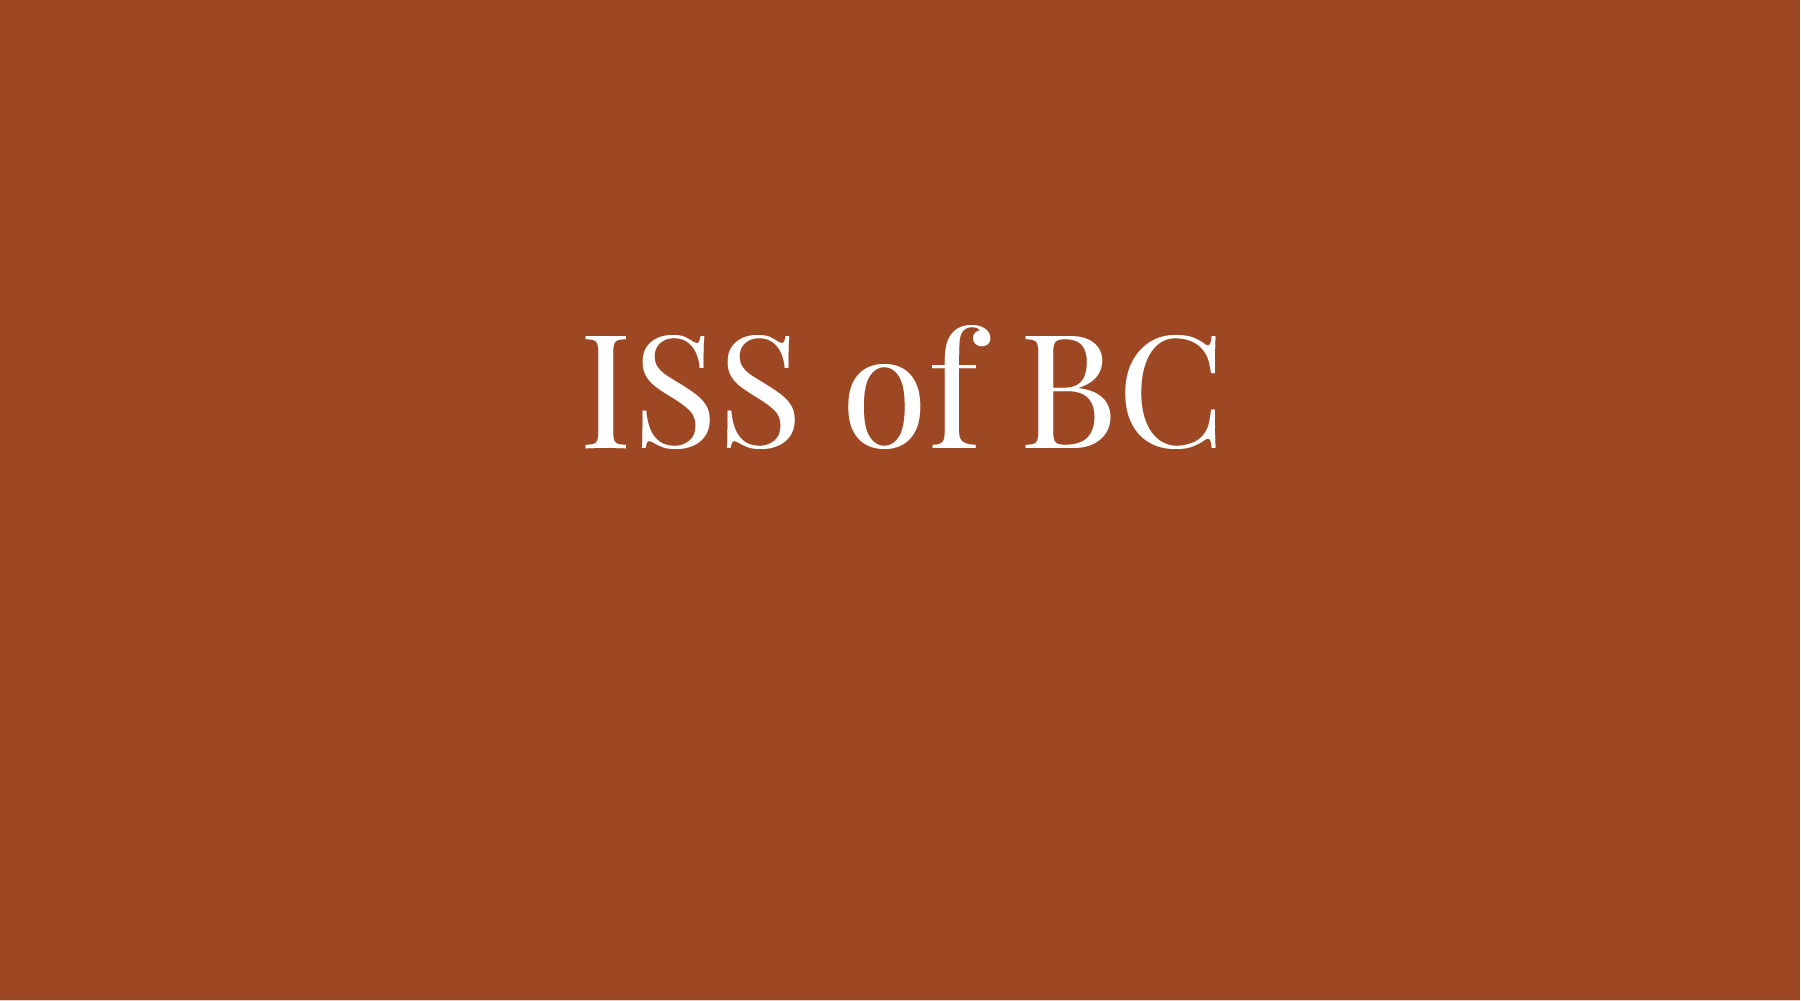 OUR SEPTEMBER NON-PROFIT - ISS OF BC